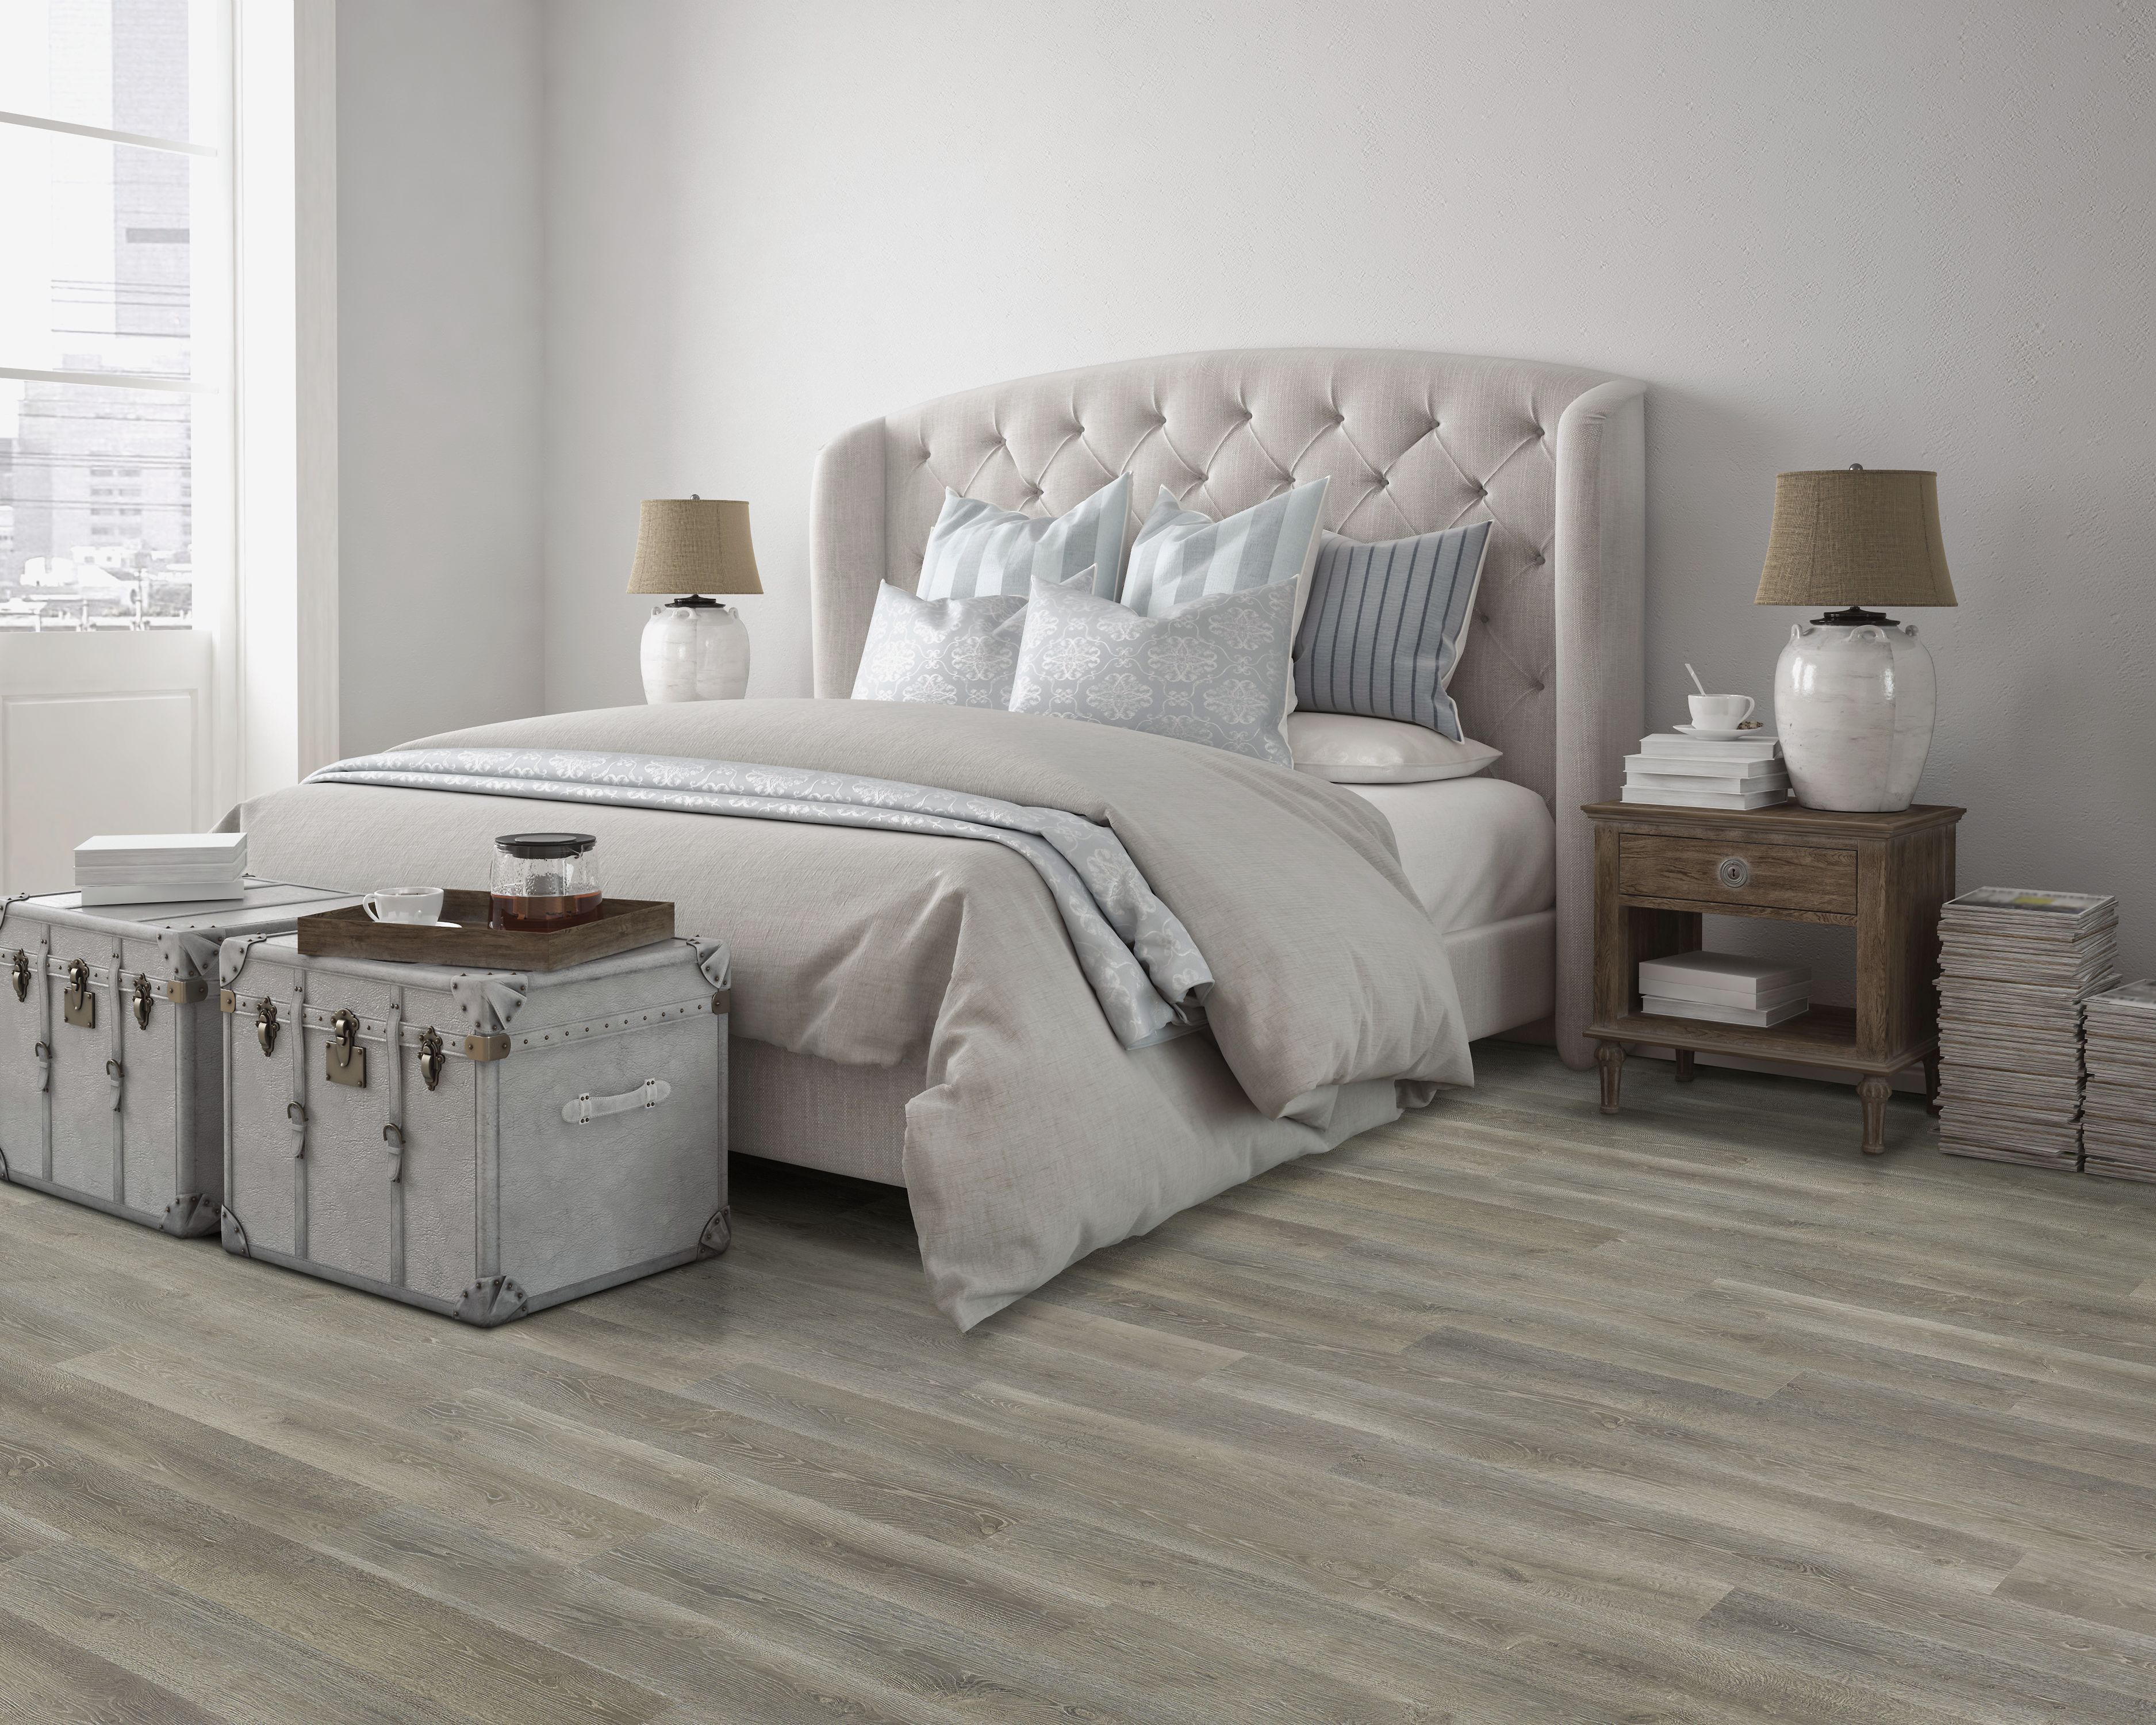 light grey laminate floors in a traditional style bedroom